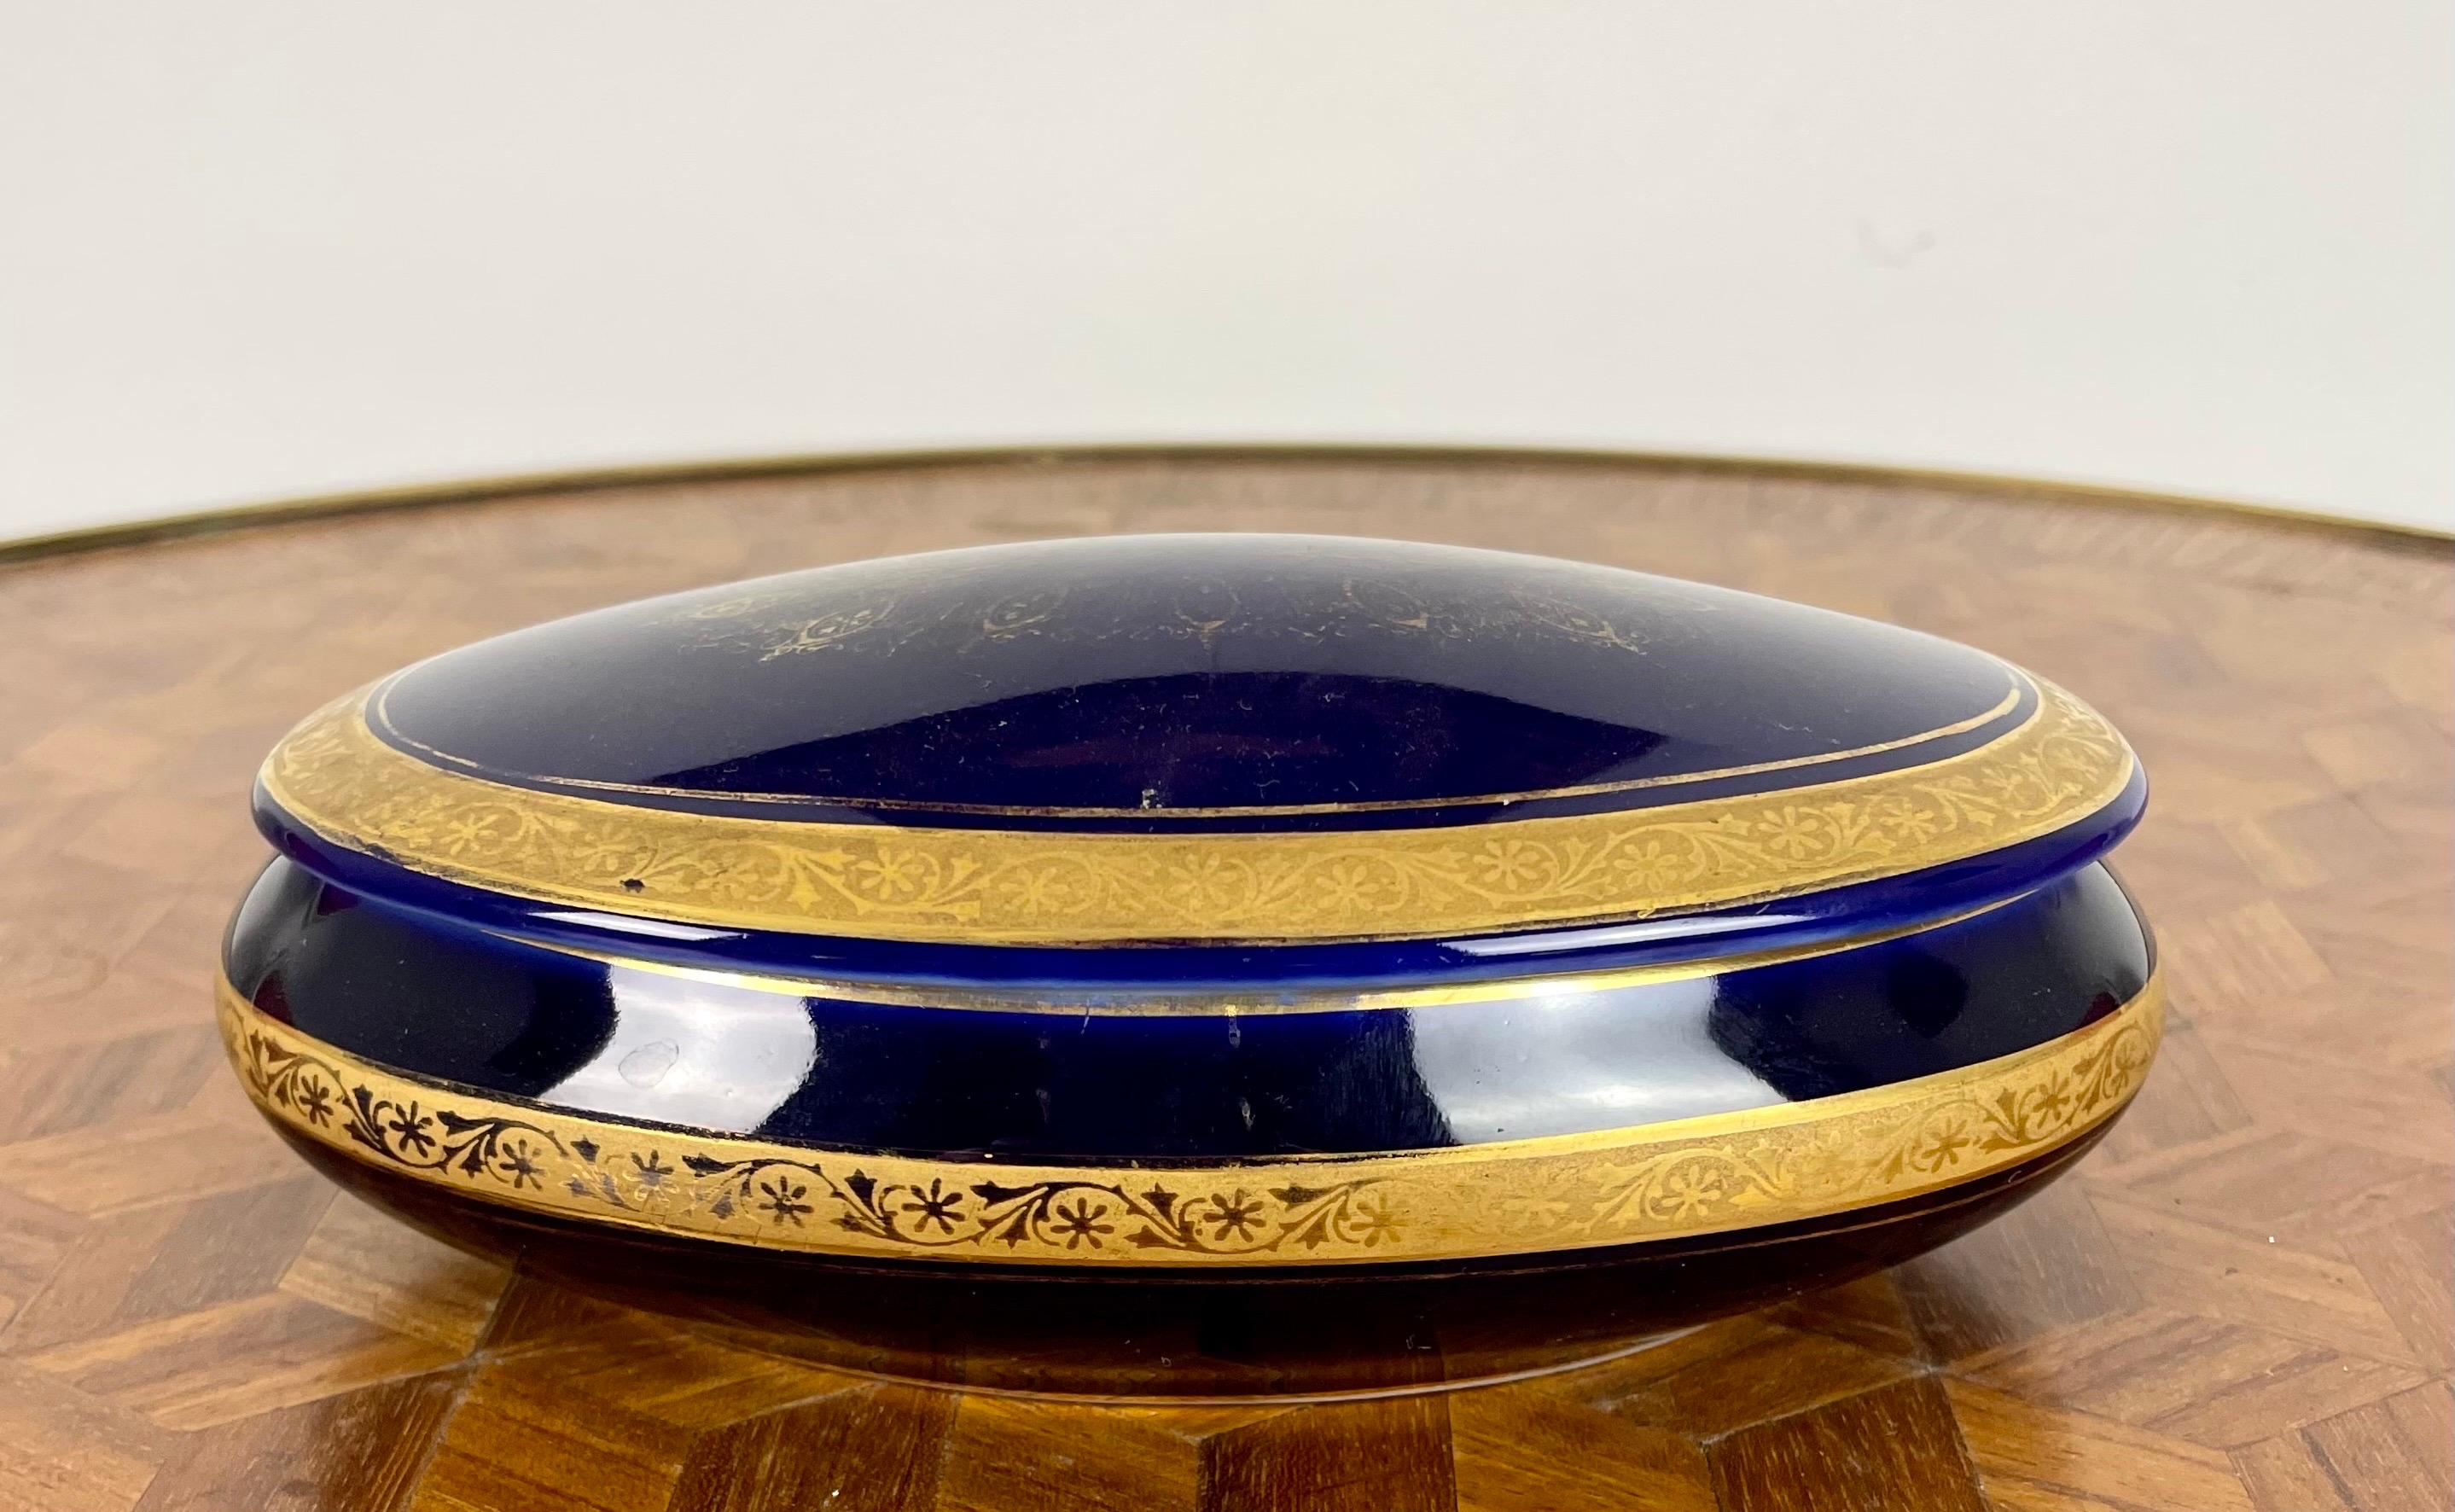 Pretty candy box in Limoges porcelain. Can be used in jewelry box, candy box or vide-poche.
The porcelain is a beautiful cobalt blue enhanced with fine gold.
Stamped in a circle Limoges France, corresponding to the manufacturers decorators Malbec